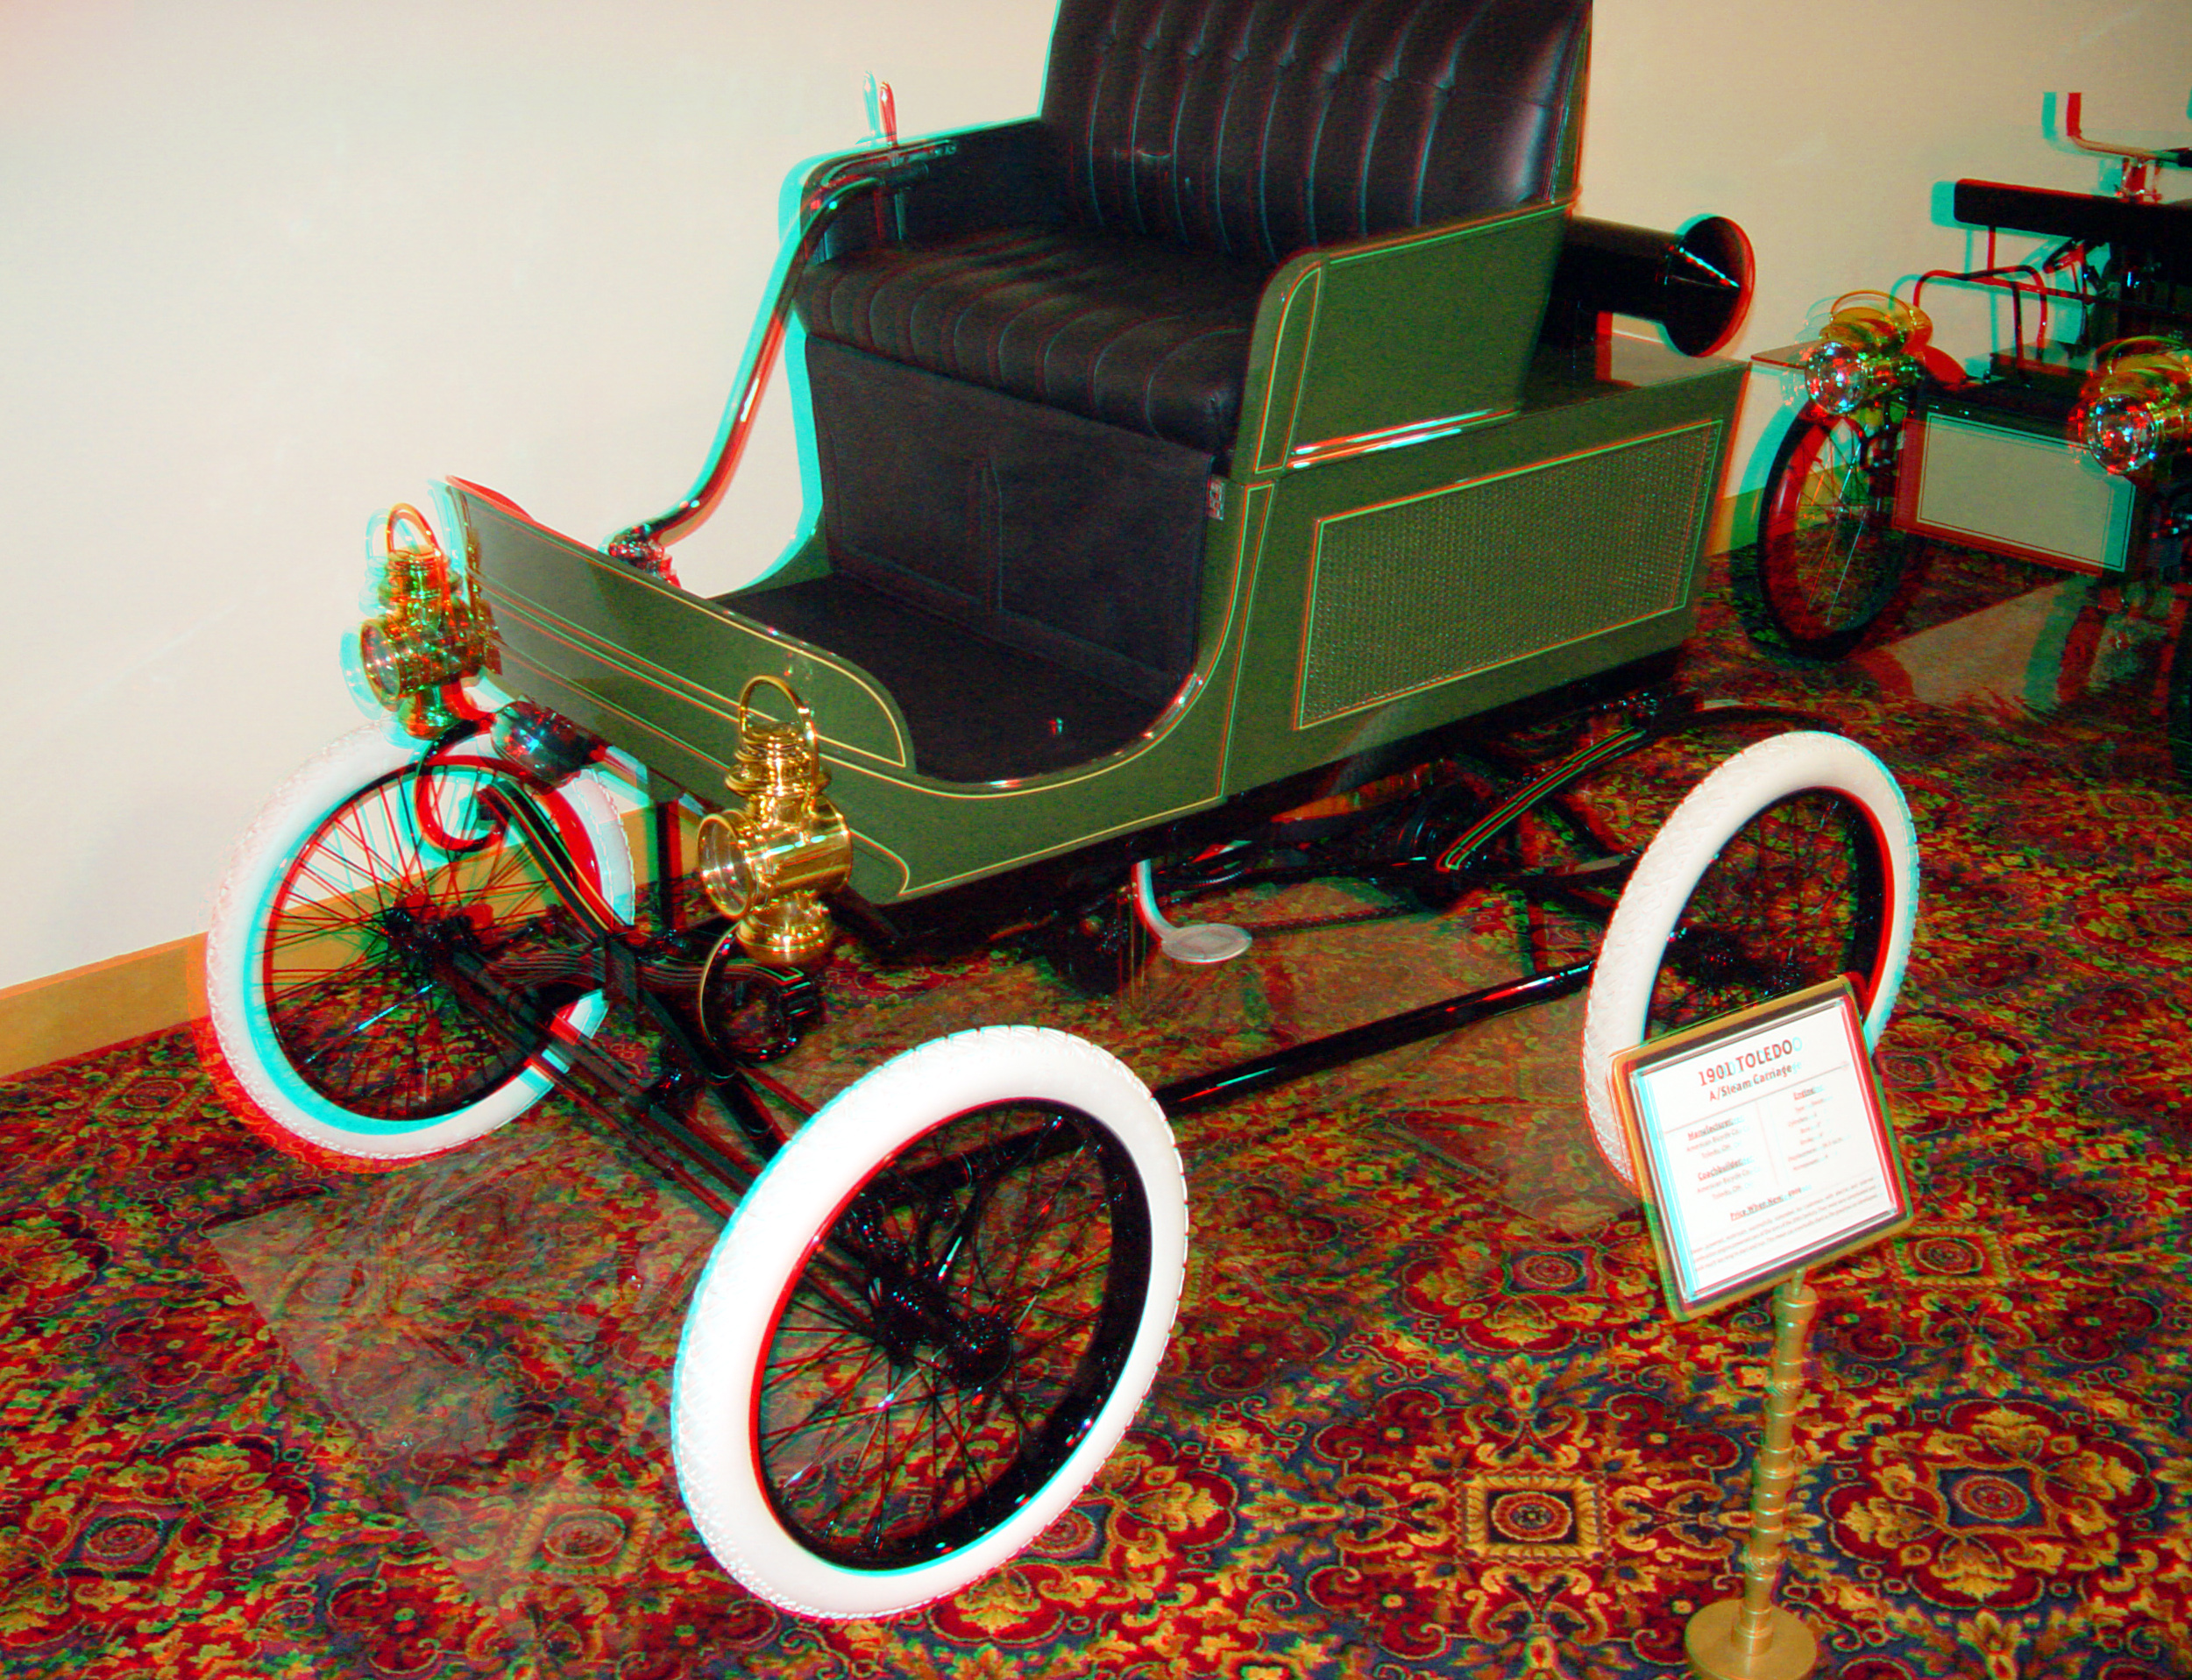 horseless carriage